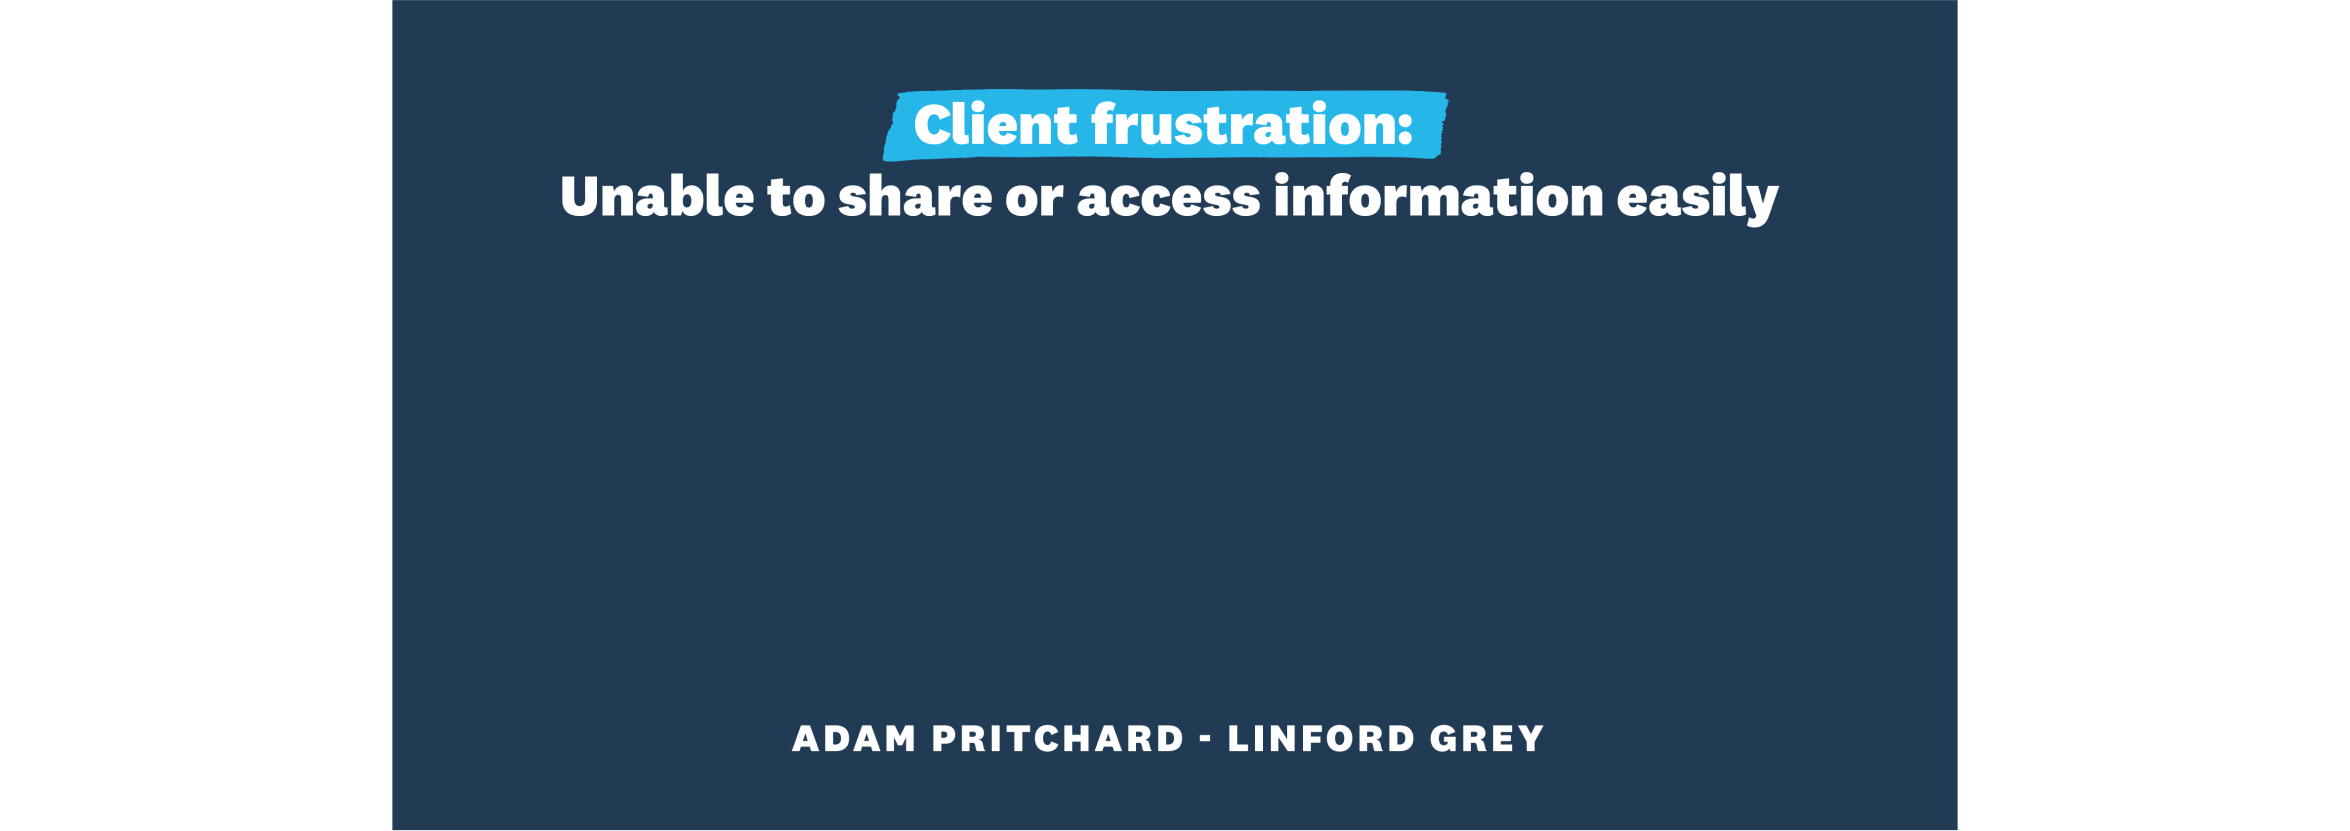 Client frustration: Unable to share or access information easily